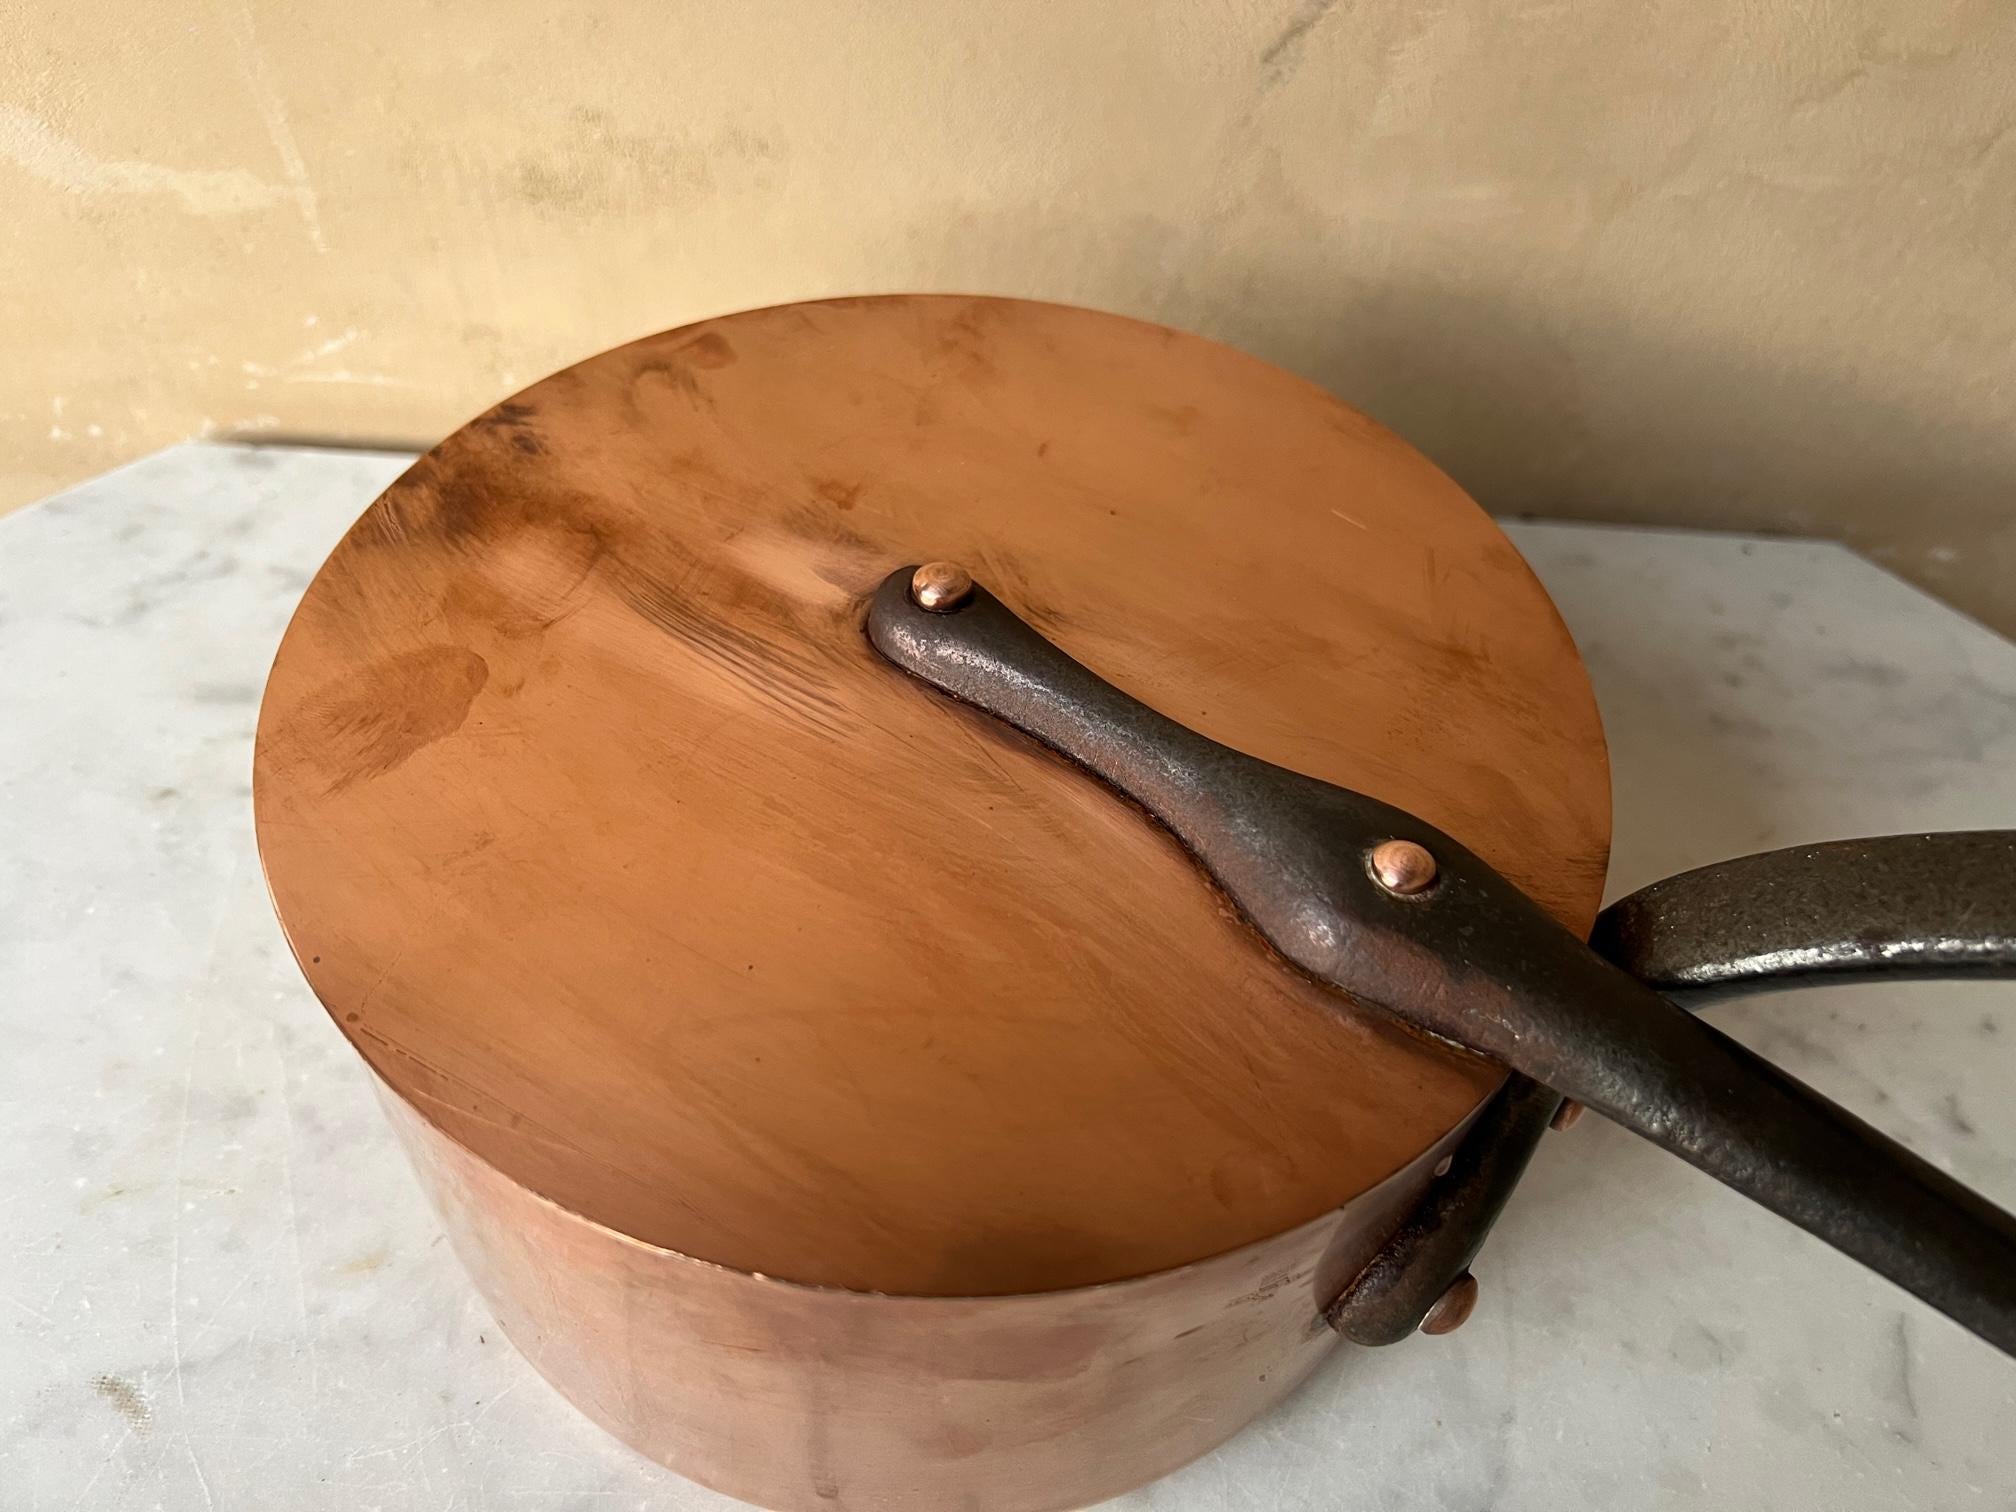 Vintage French copper professional sauce pan and lid. The copper pot and handle have long cast iron handles with copper rivets and loops at the top for hanging each. Each piece has a layer of tin and ready to use.

The pan is stamped La Cuissinier